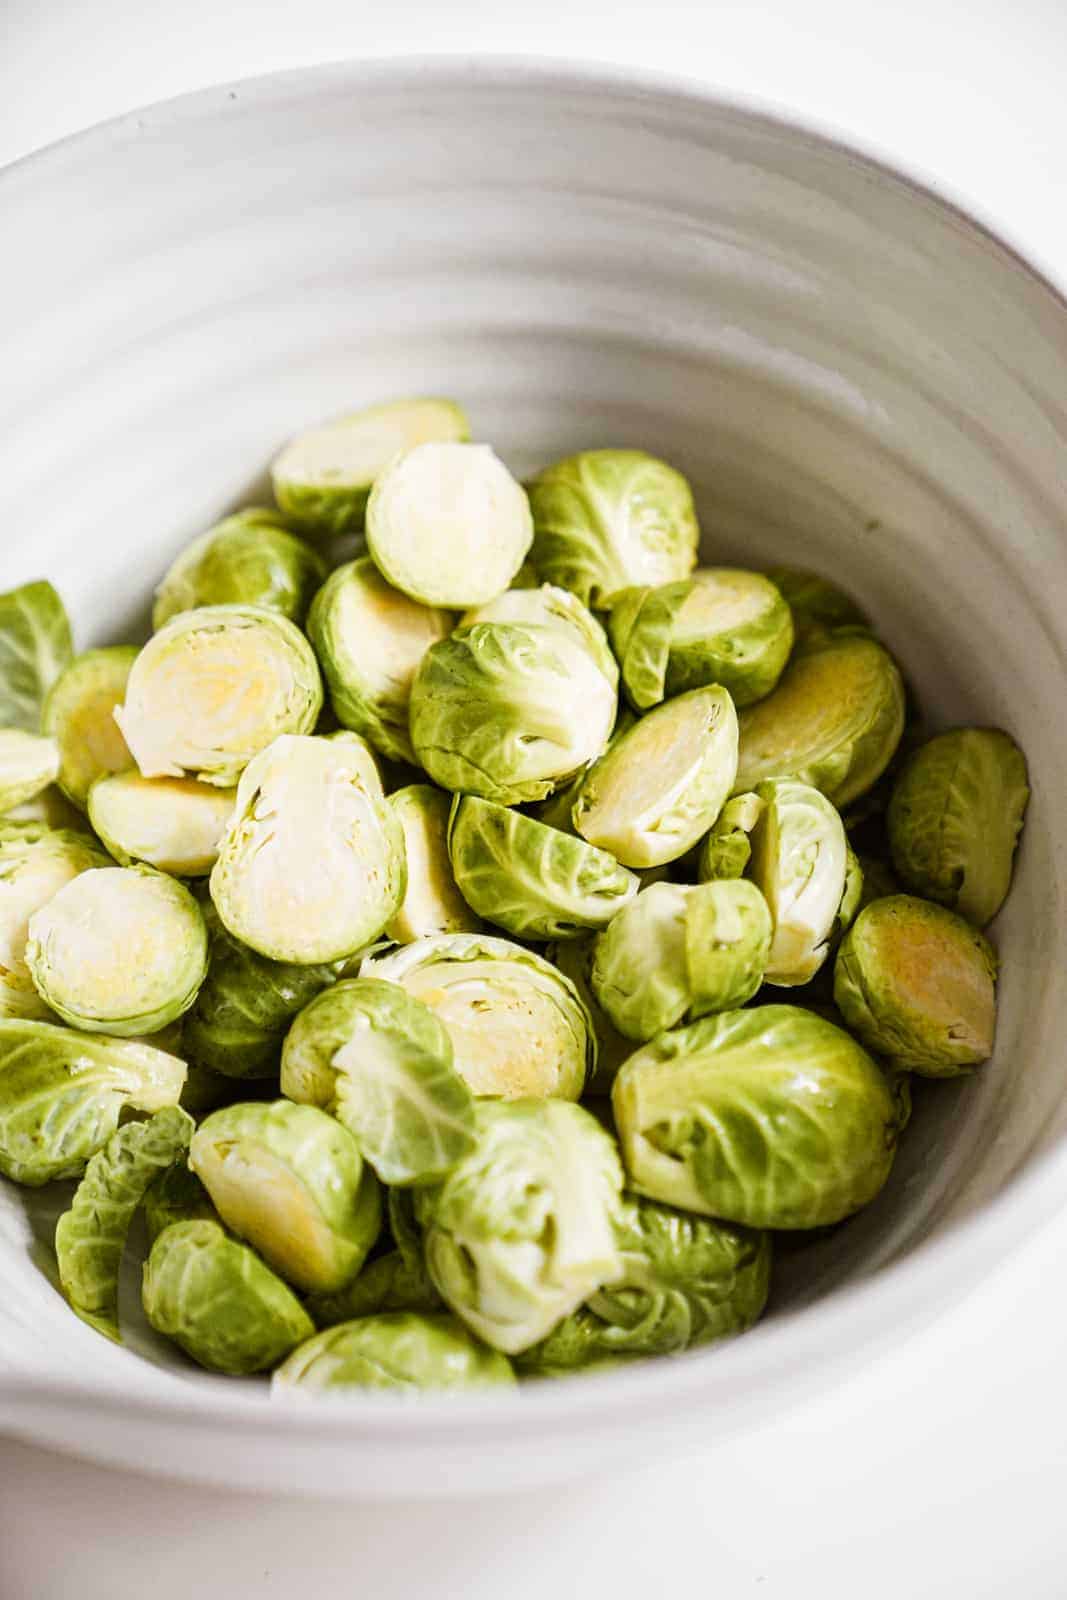 Raw brussel sprouts in a bowl